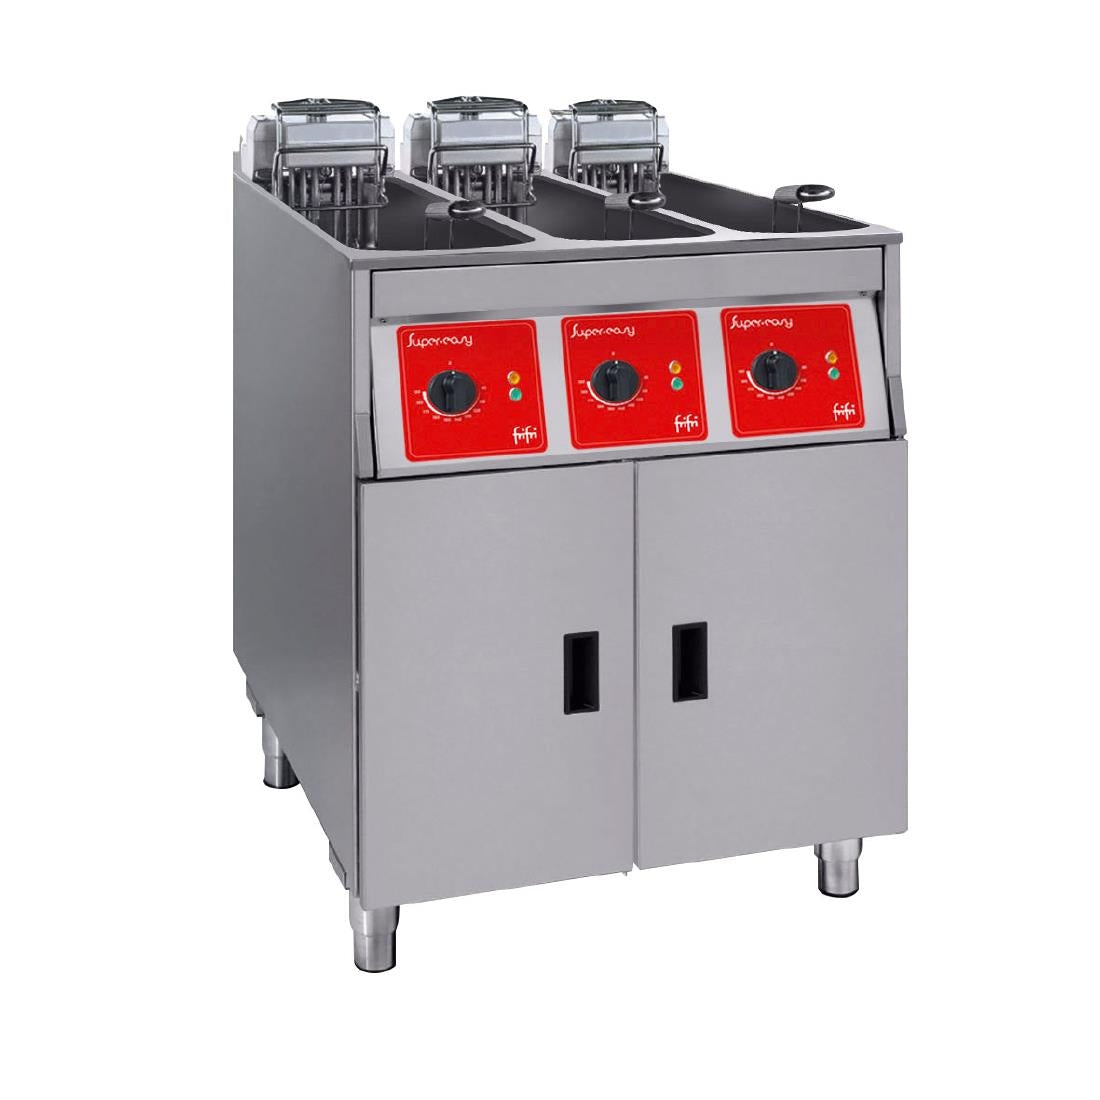 HS078-3PH FriFri Super Easy 633 Electric Free-standing Fryer Triple Tank Triple Basket without Filtration 33kW Three Phase